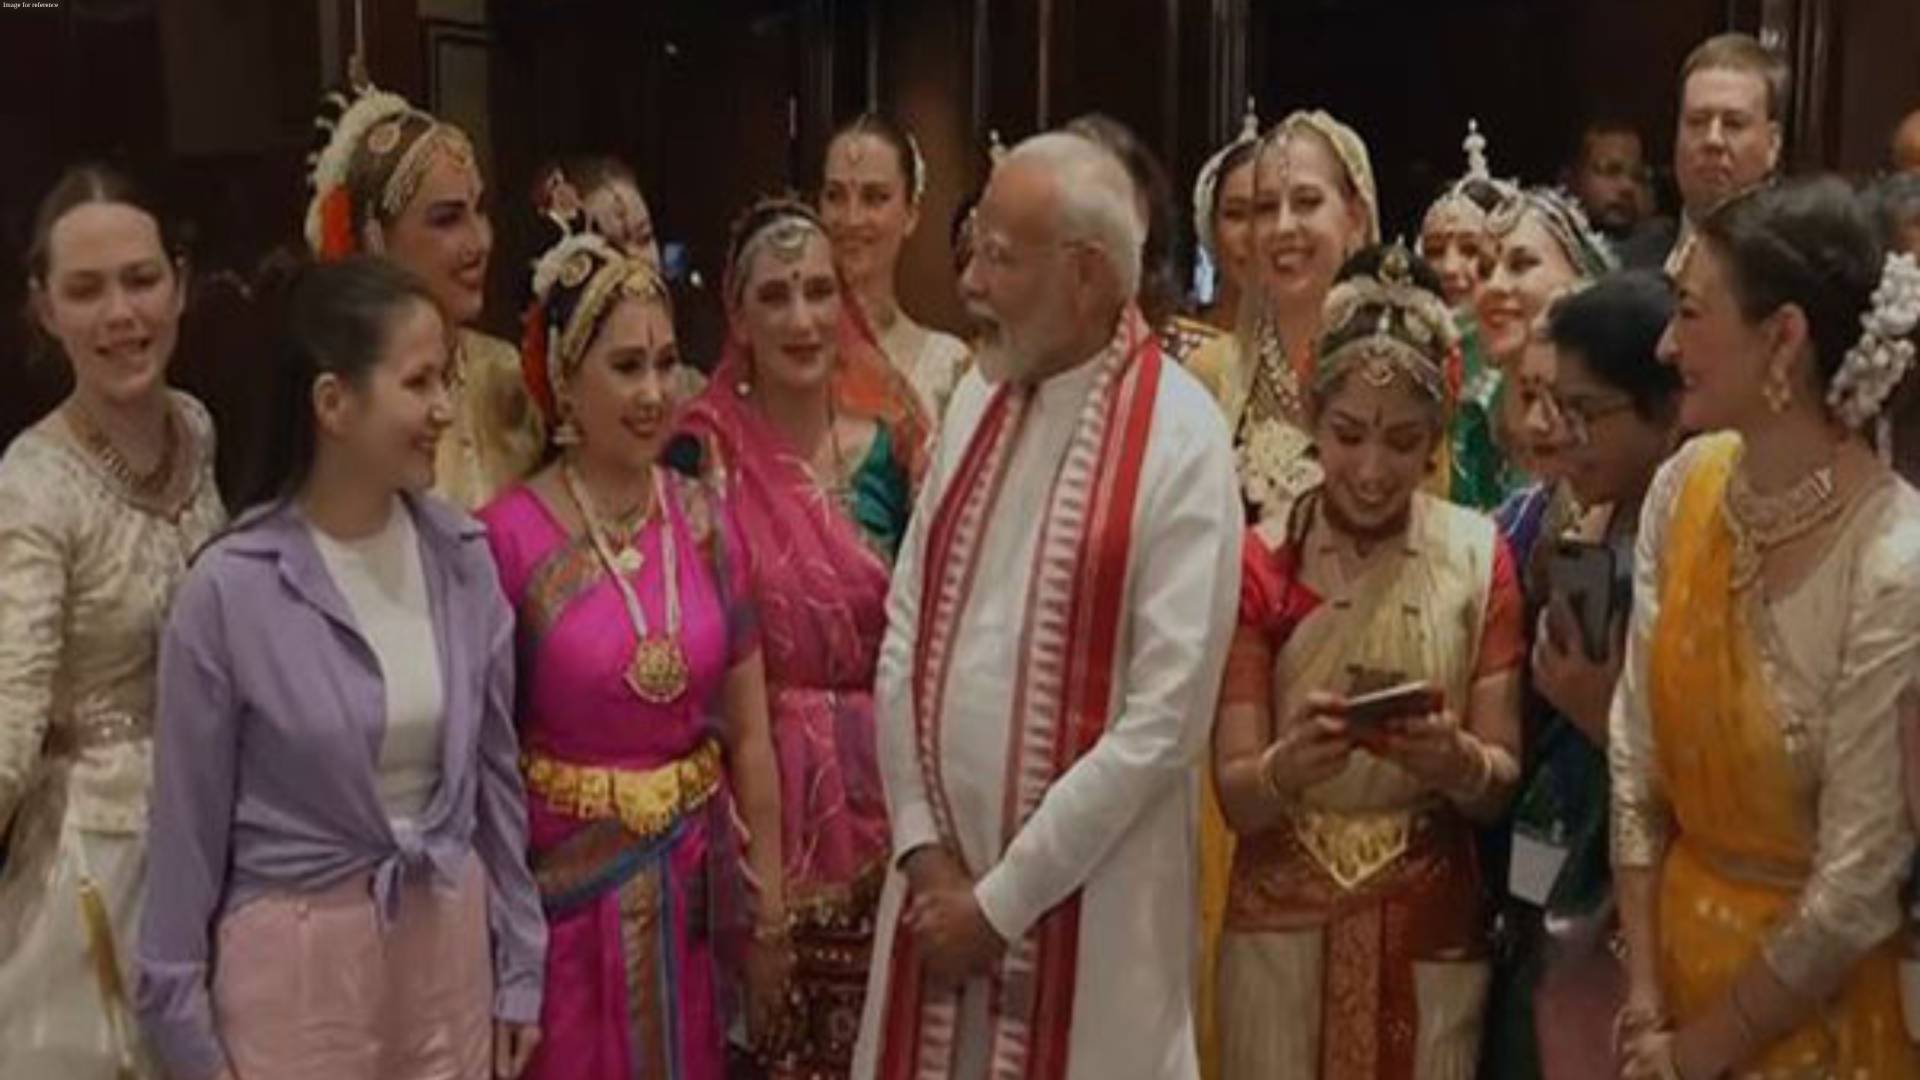 PM Modi interacts with artists of Russian Cultural Troupe